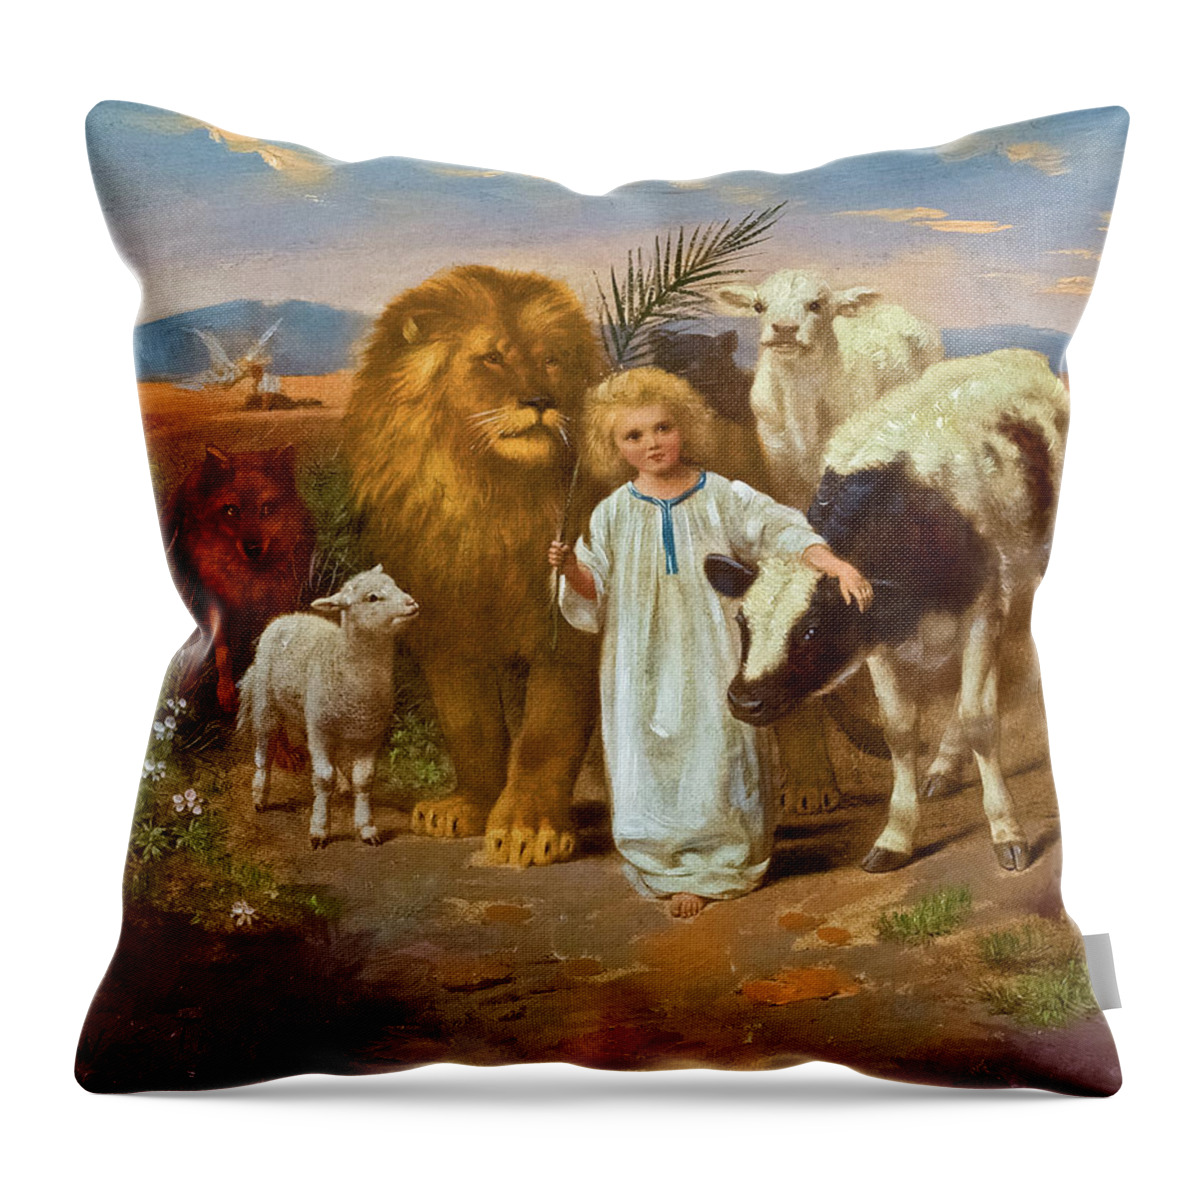 William Strutt Throw Pillow featuring the painting A Little Child Shall Lead Them by William Strutt